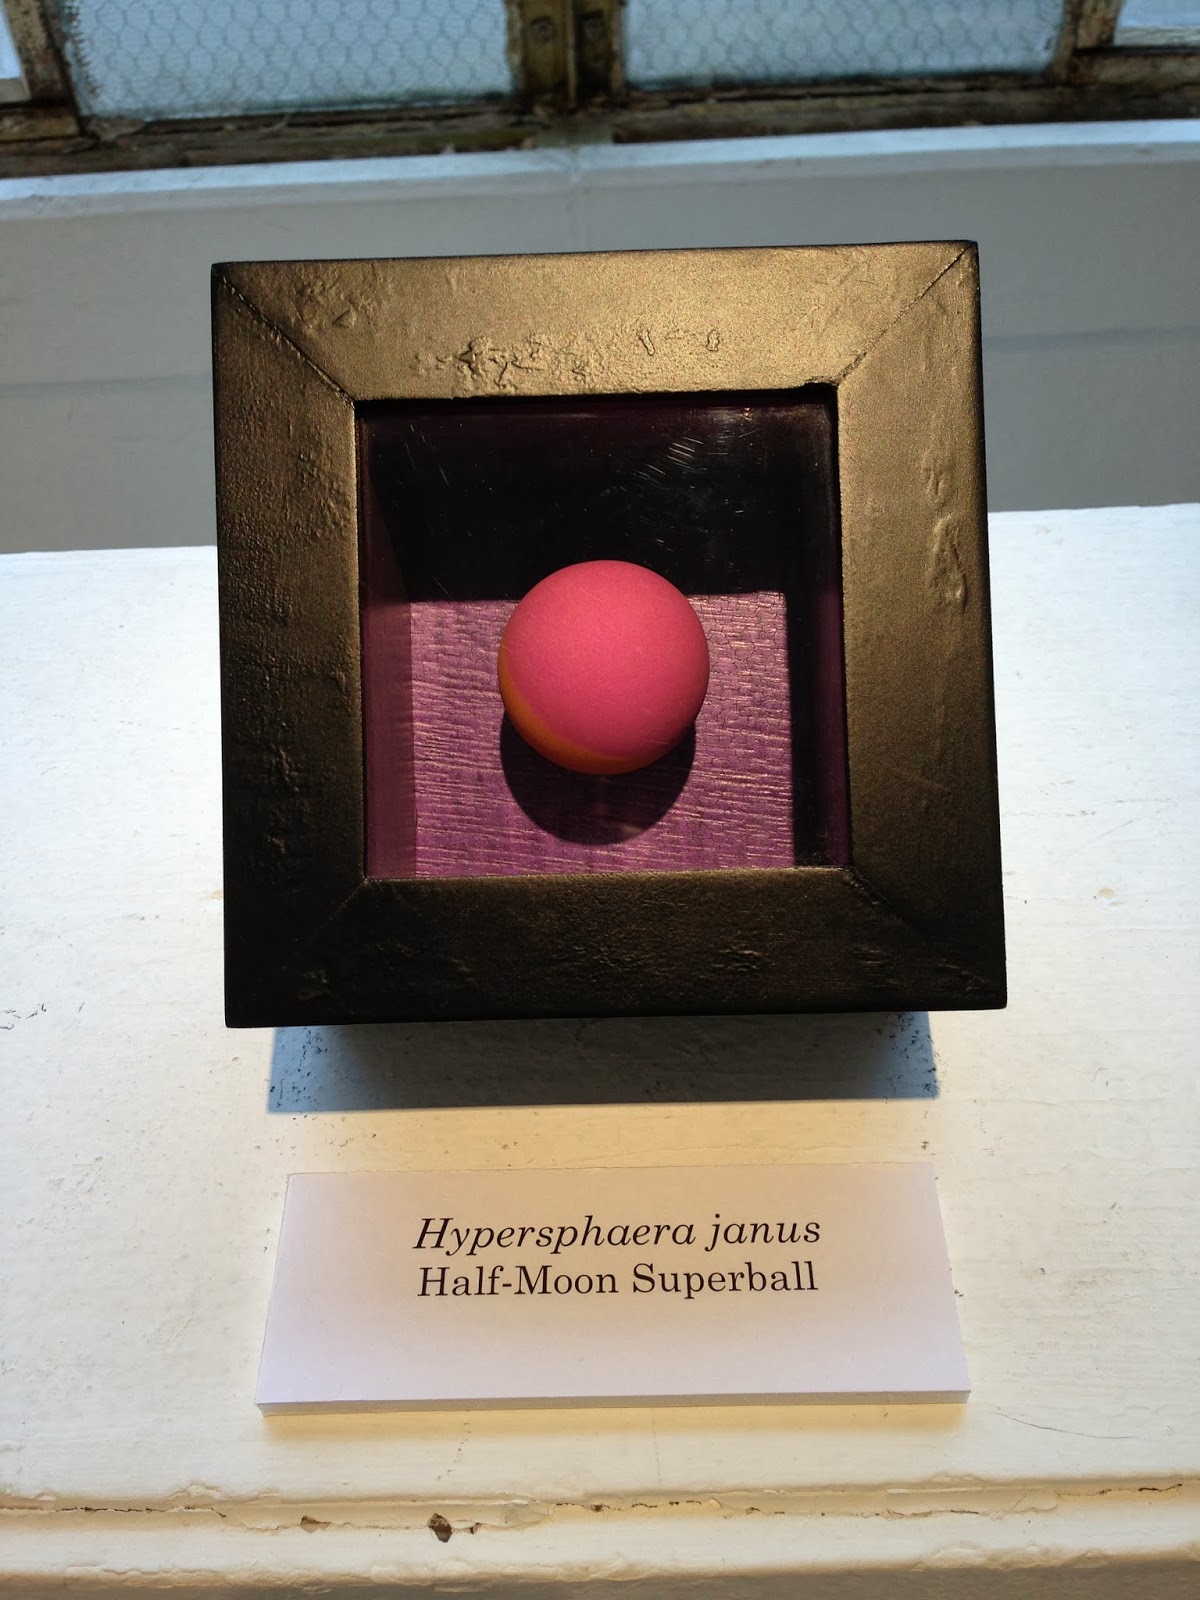   Hypersphaera janus   Half-Moon Superball  November 18, 2013  5 7/16"x 5 7/16"x 2 7/8"   Classification    Available for purchase  